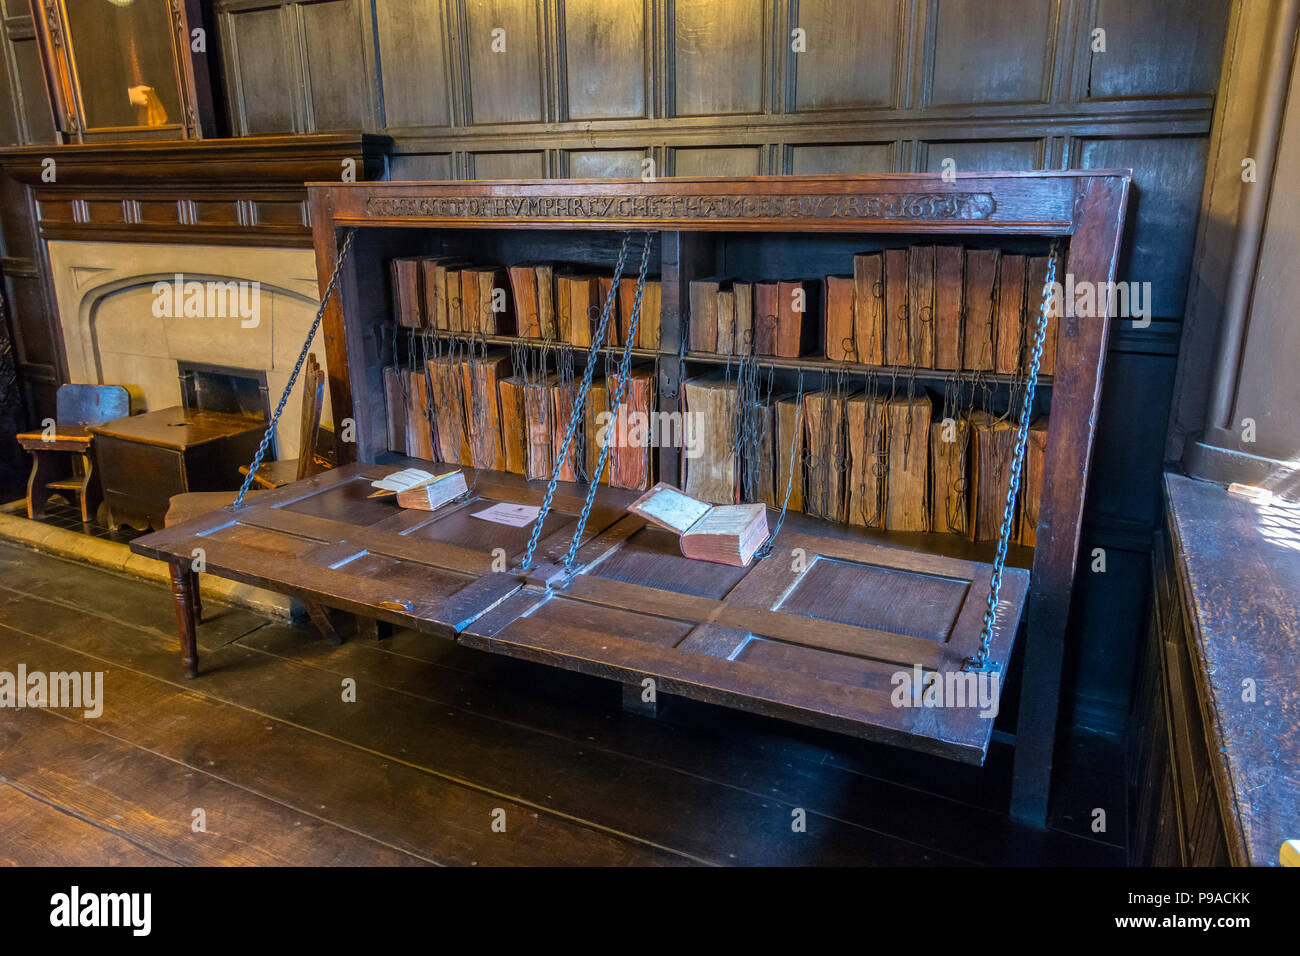 The Chained Library bookcase, dating from 1655, in the Reading Room at Chetham's Library, Manchester, England, UK Stock Photo